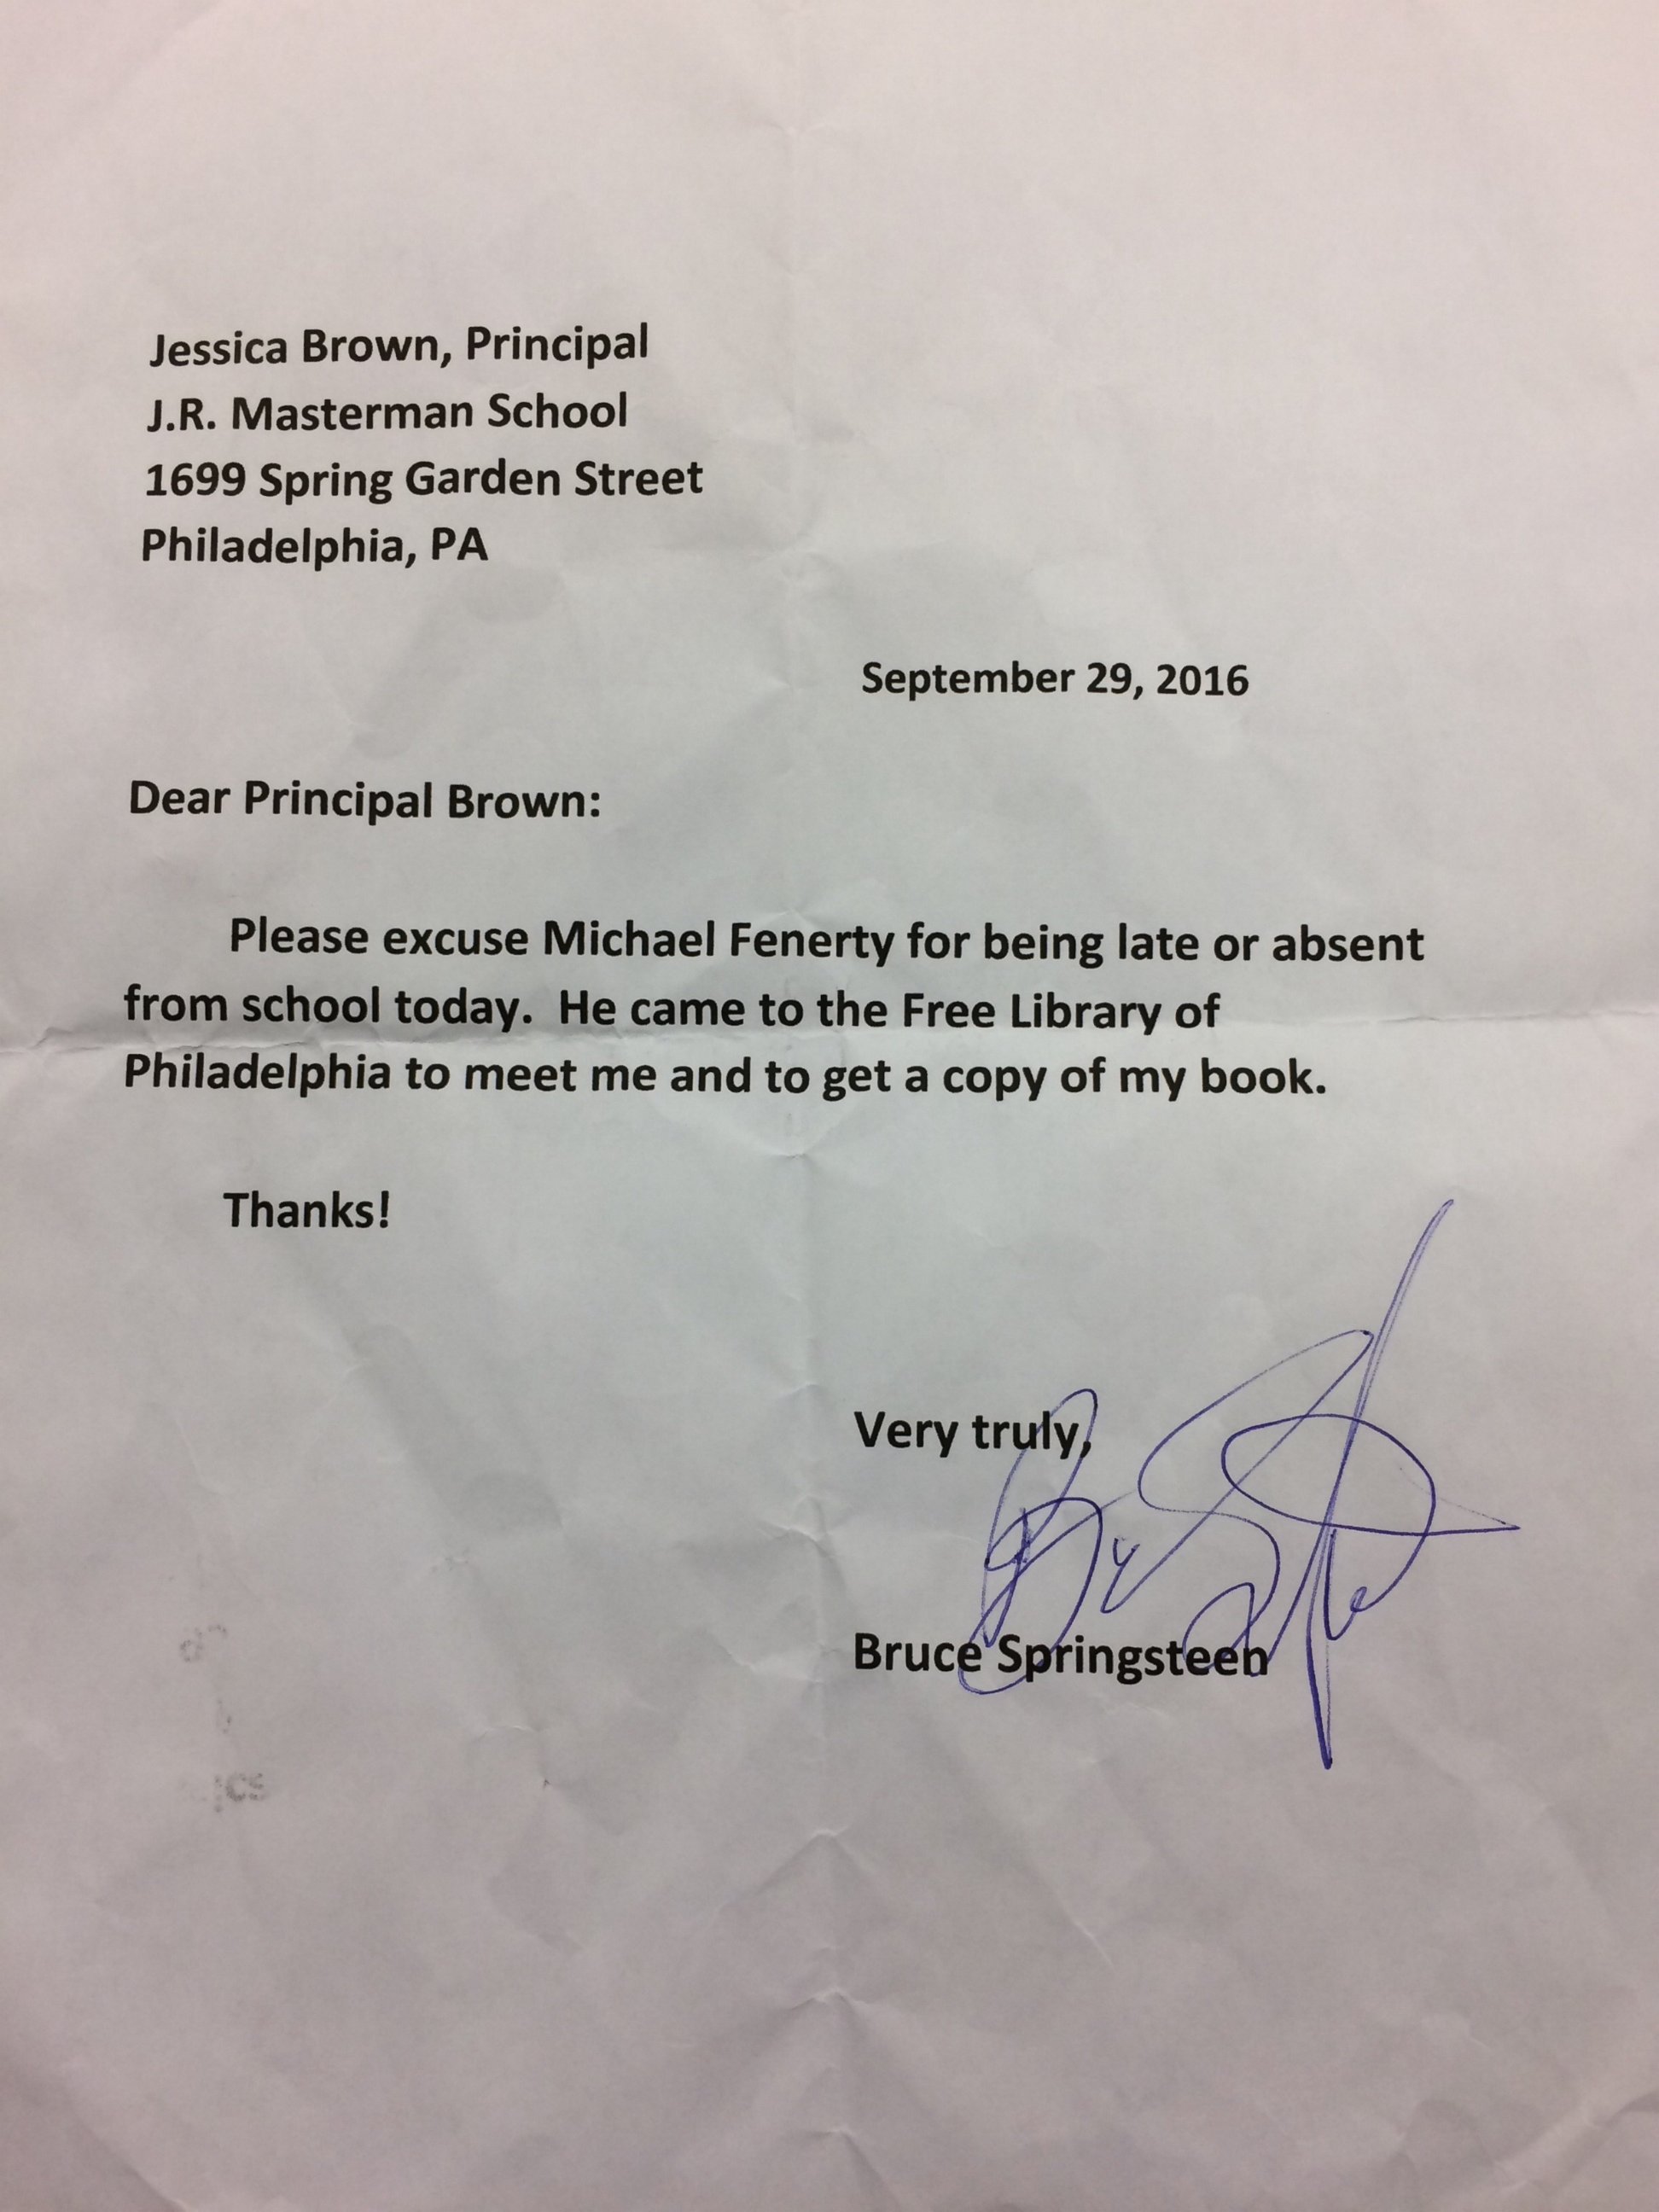 PHOTO: Springsteen Signs 5th Grader’s School Absence Note, But Dad Keeps the Original